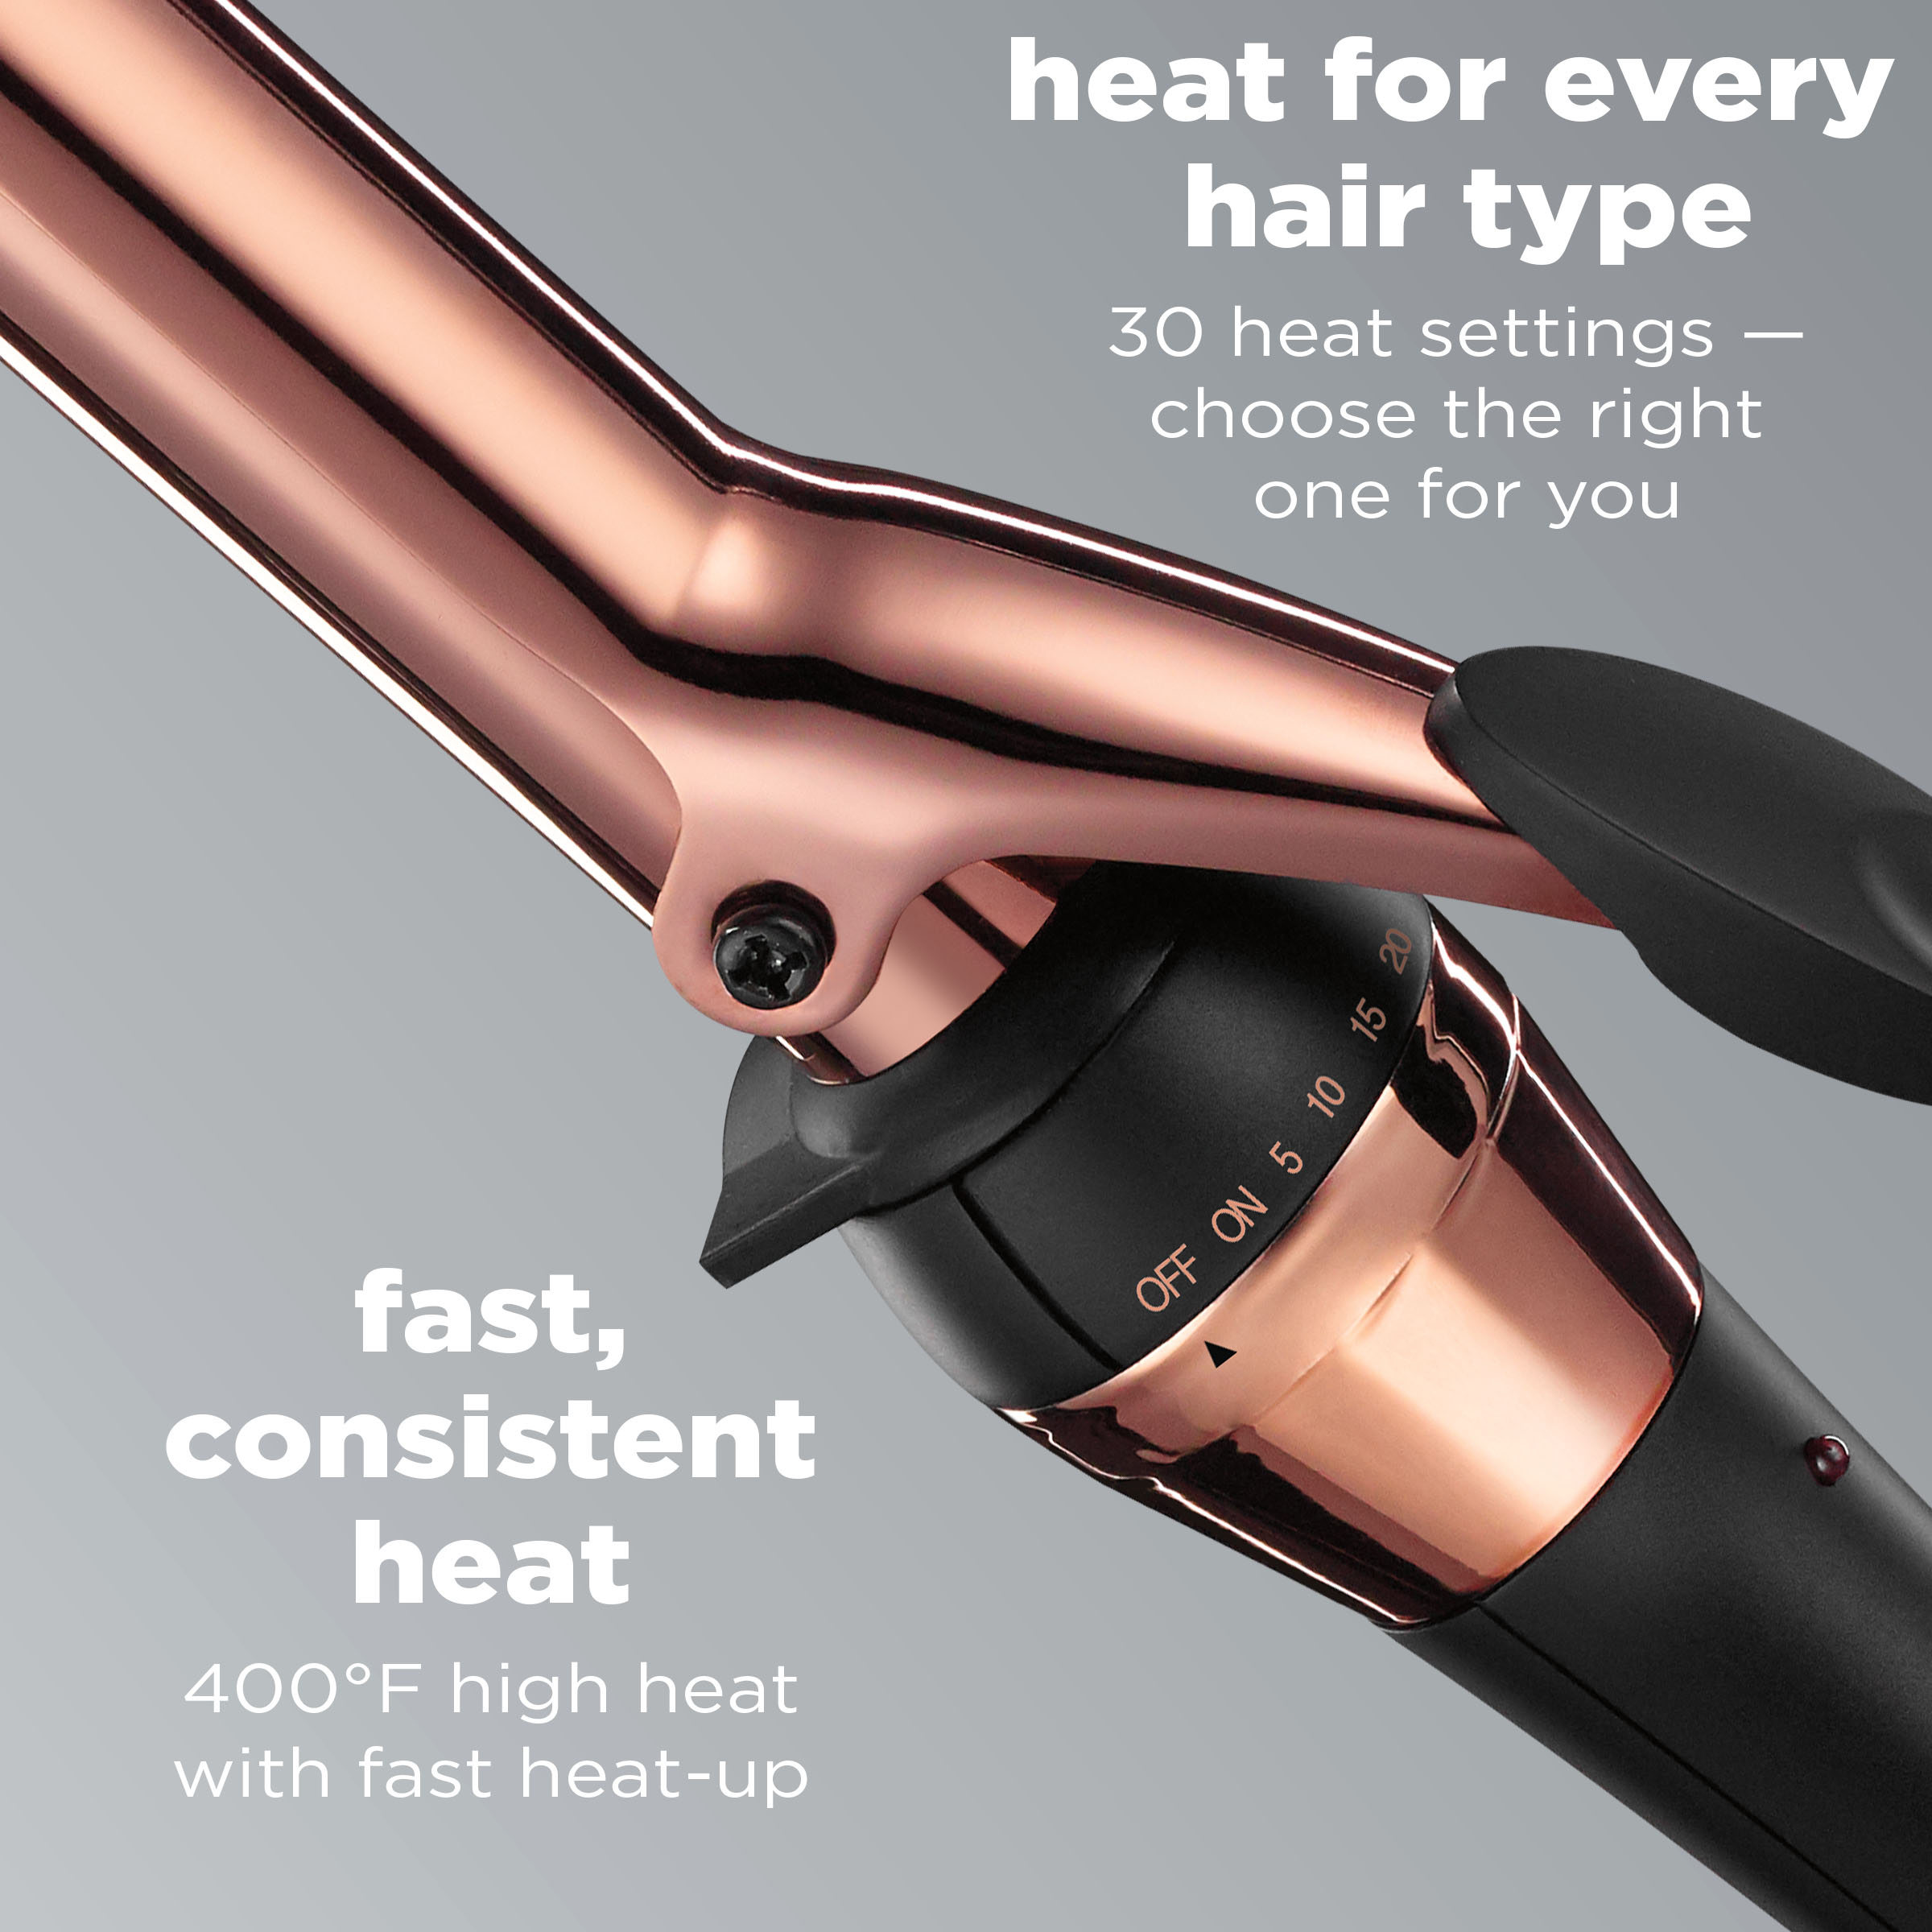 Infinitipro by Conair Rose Gold Titanium 1-Inch Curling Iron CD250N - image 2 of 9